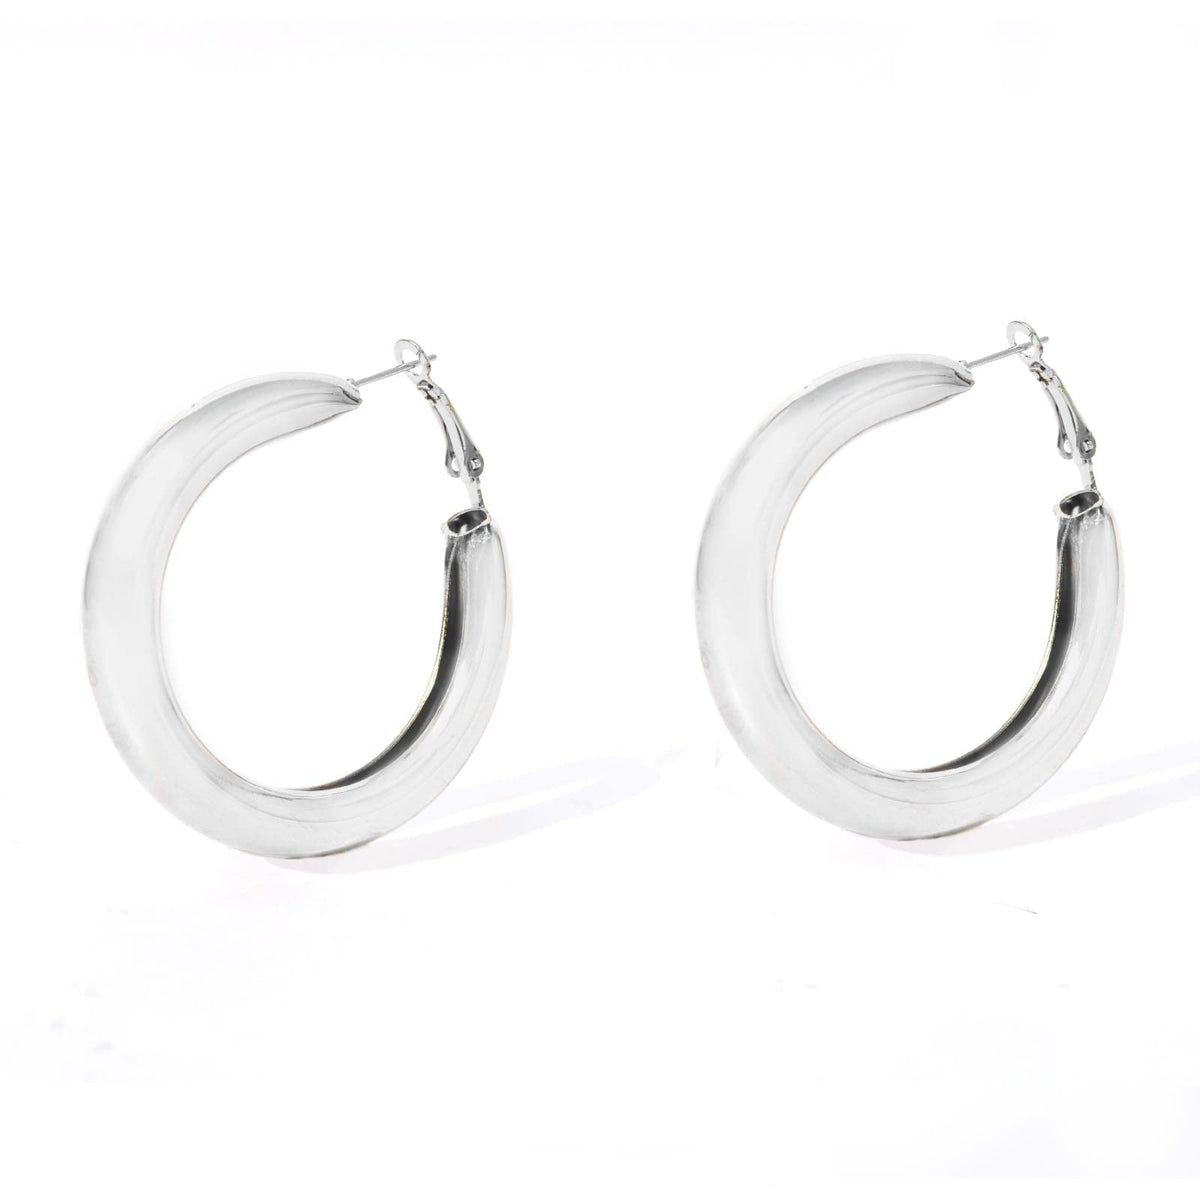 Joker & Witch Classic Bold Silver Hoops for Women